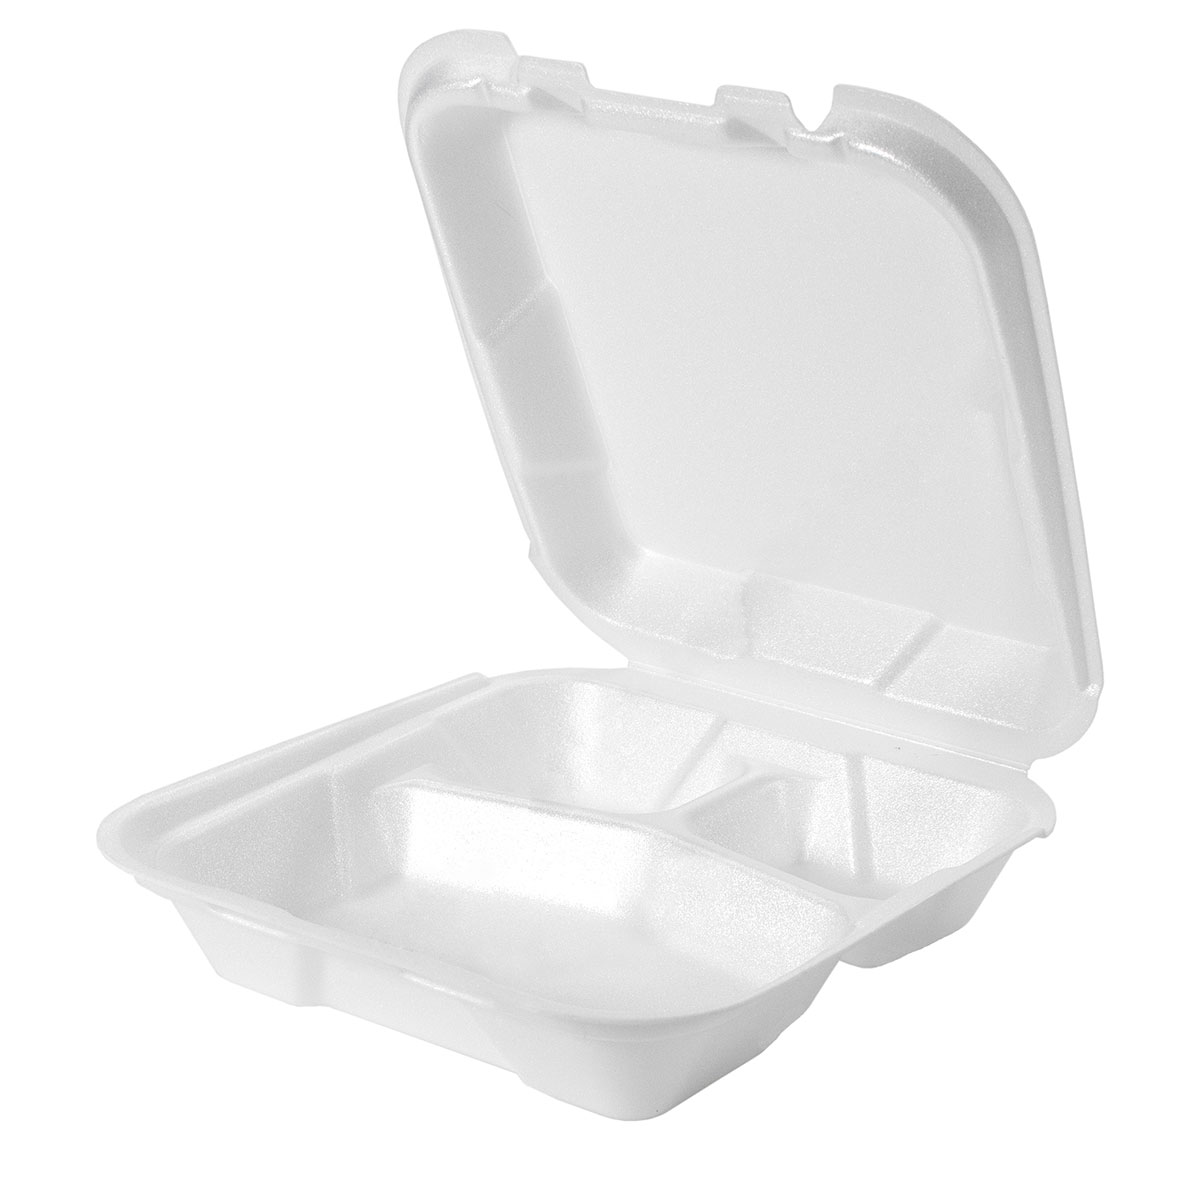 White 8" x 8" Three-Compartment Snap It Lock Hinged Square Container